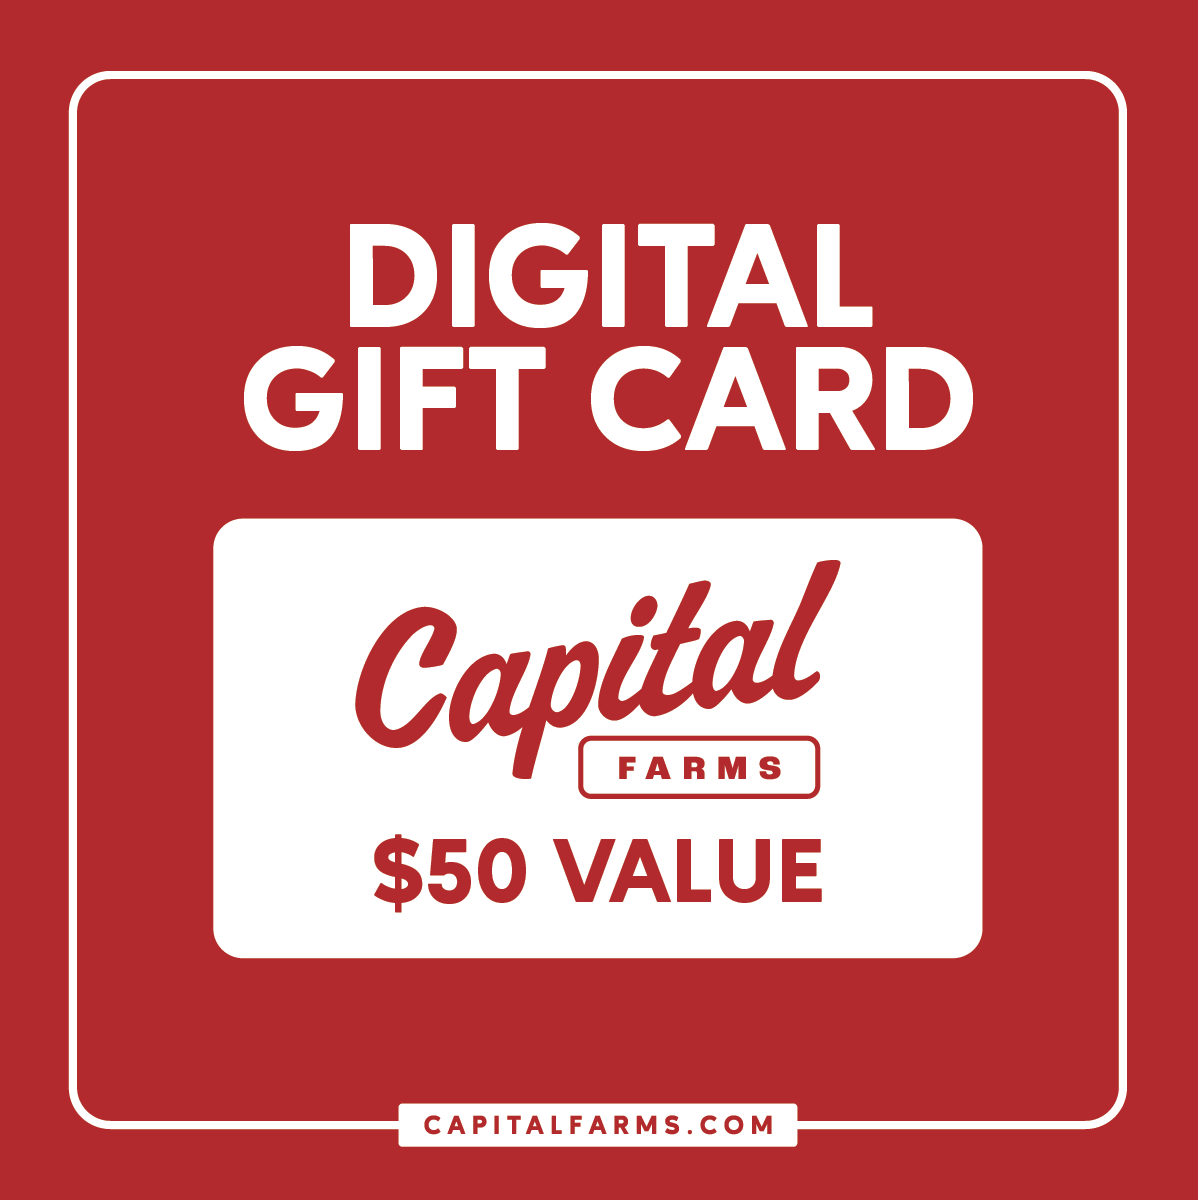 $50 - Digital Gift Card - Capital Farms Meats & Provisions